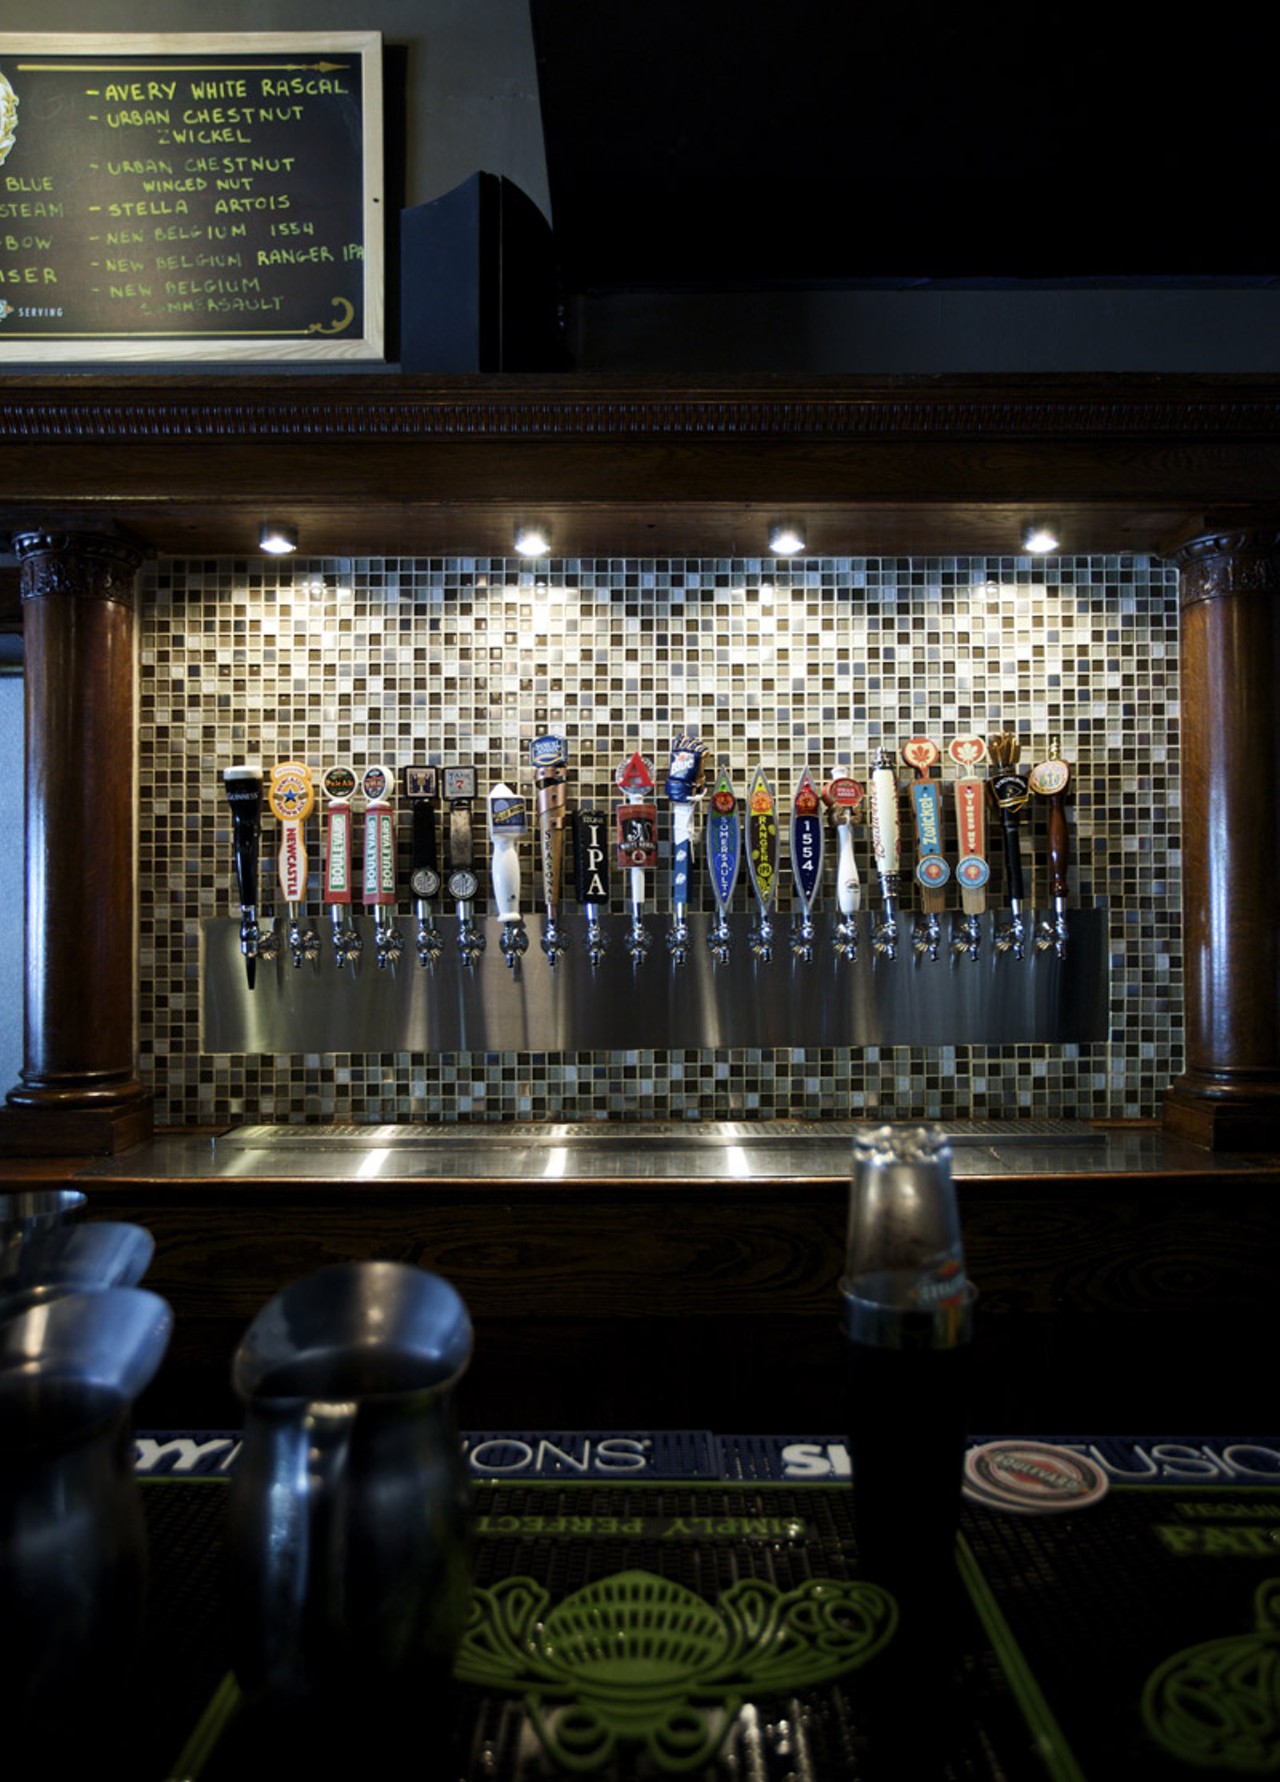 Three Kings Public House has a 20-tap beer list, with local, domestic and imported beers.